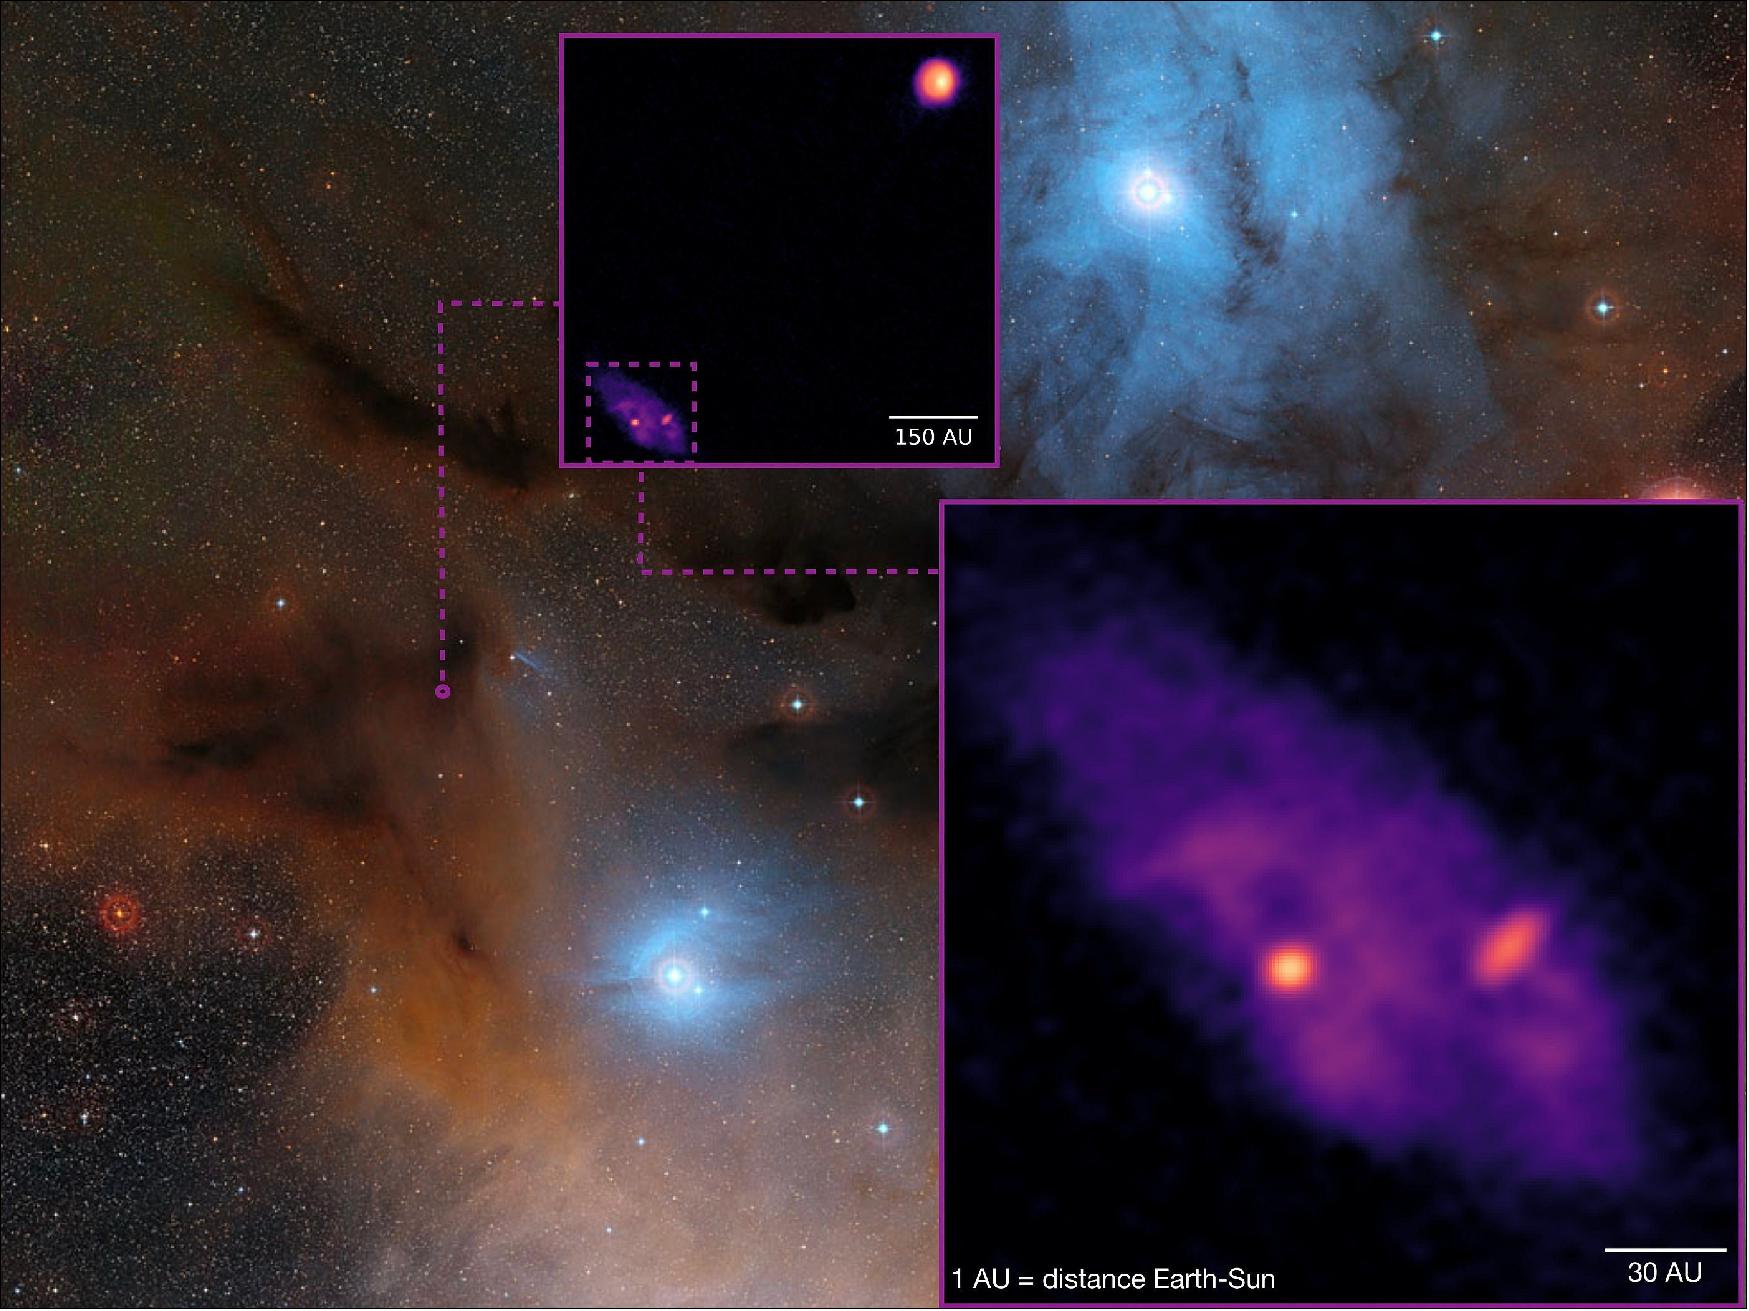 Figure 59: Zoom into the Ophiuchus molecular cloud, highlighting the star forming system IRAS 16293-2422 with the protostar B in the upper right corner and the now clearly identified protostars A1 and A2 on the bottom left. The binary system is shown also in a further zoom-in panel (image credit: MPE; background: ESO/Digitized Sky Survey 2, Davide De Martin)